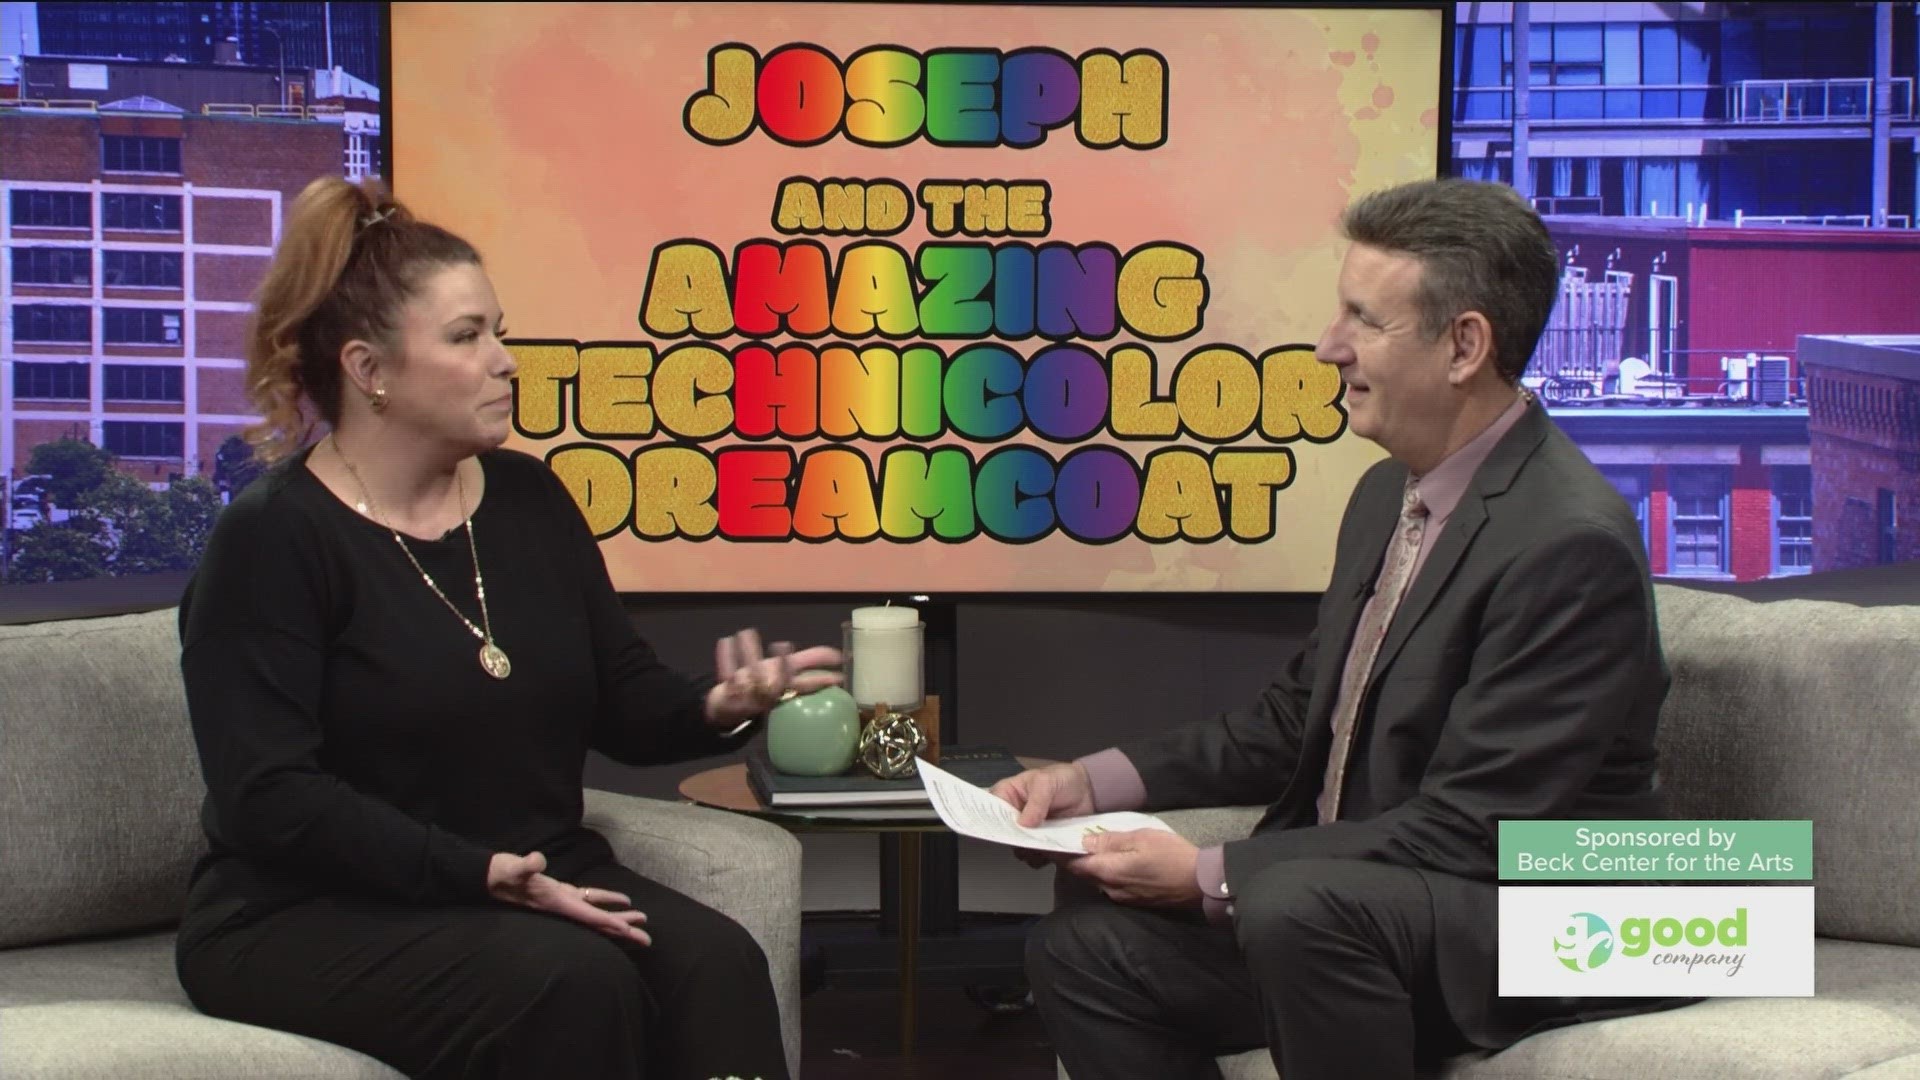 Joe talks with Mary Bridget Davies about the upcoming show "Joseph and the Amazing Technicolor Dreamcoat" Sponsored by: The Beck Center for the Arts